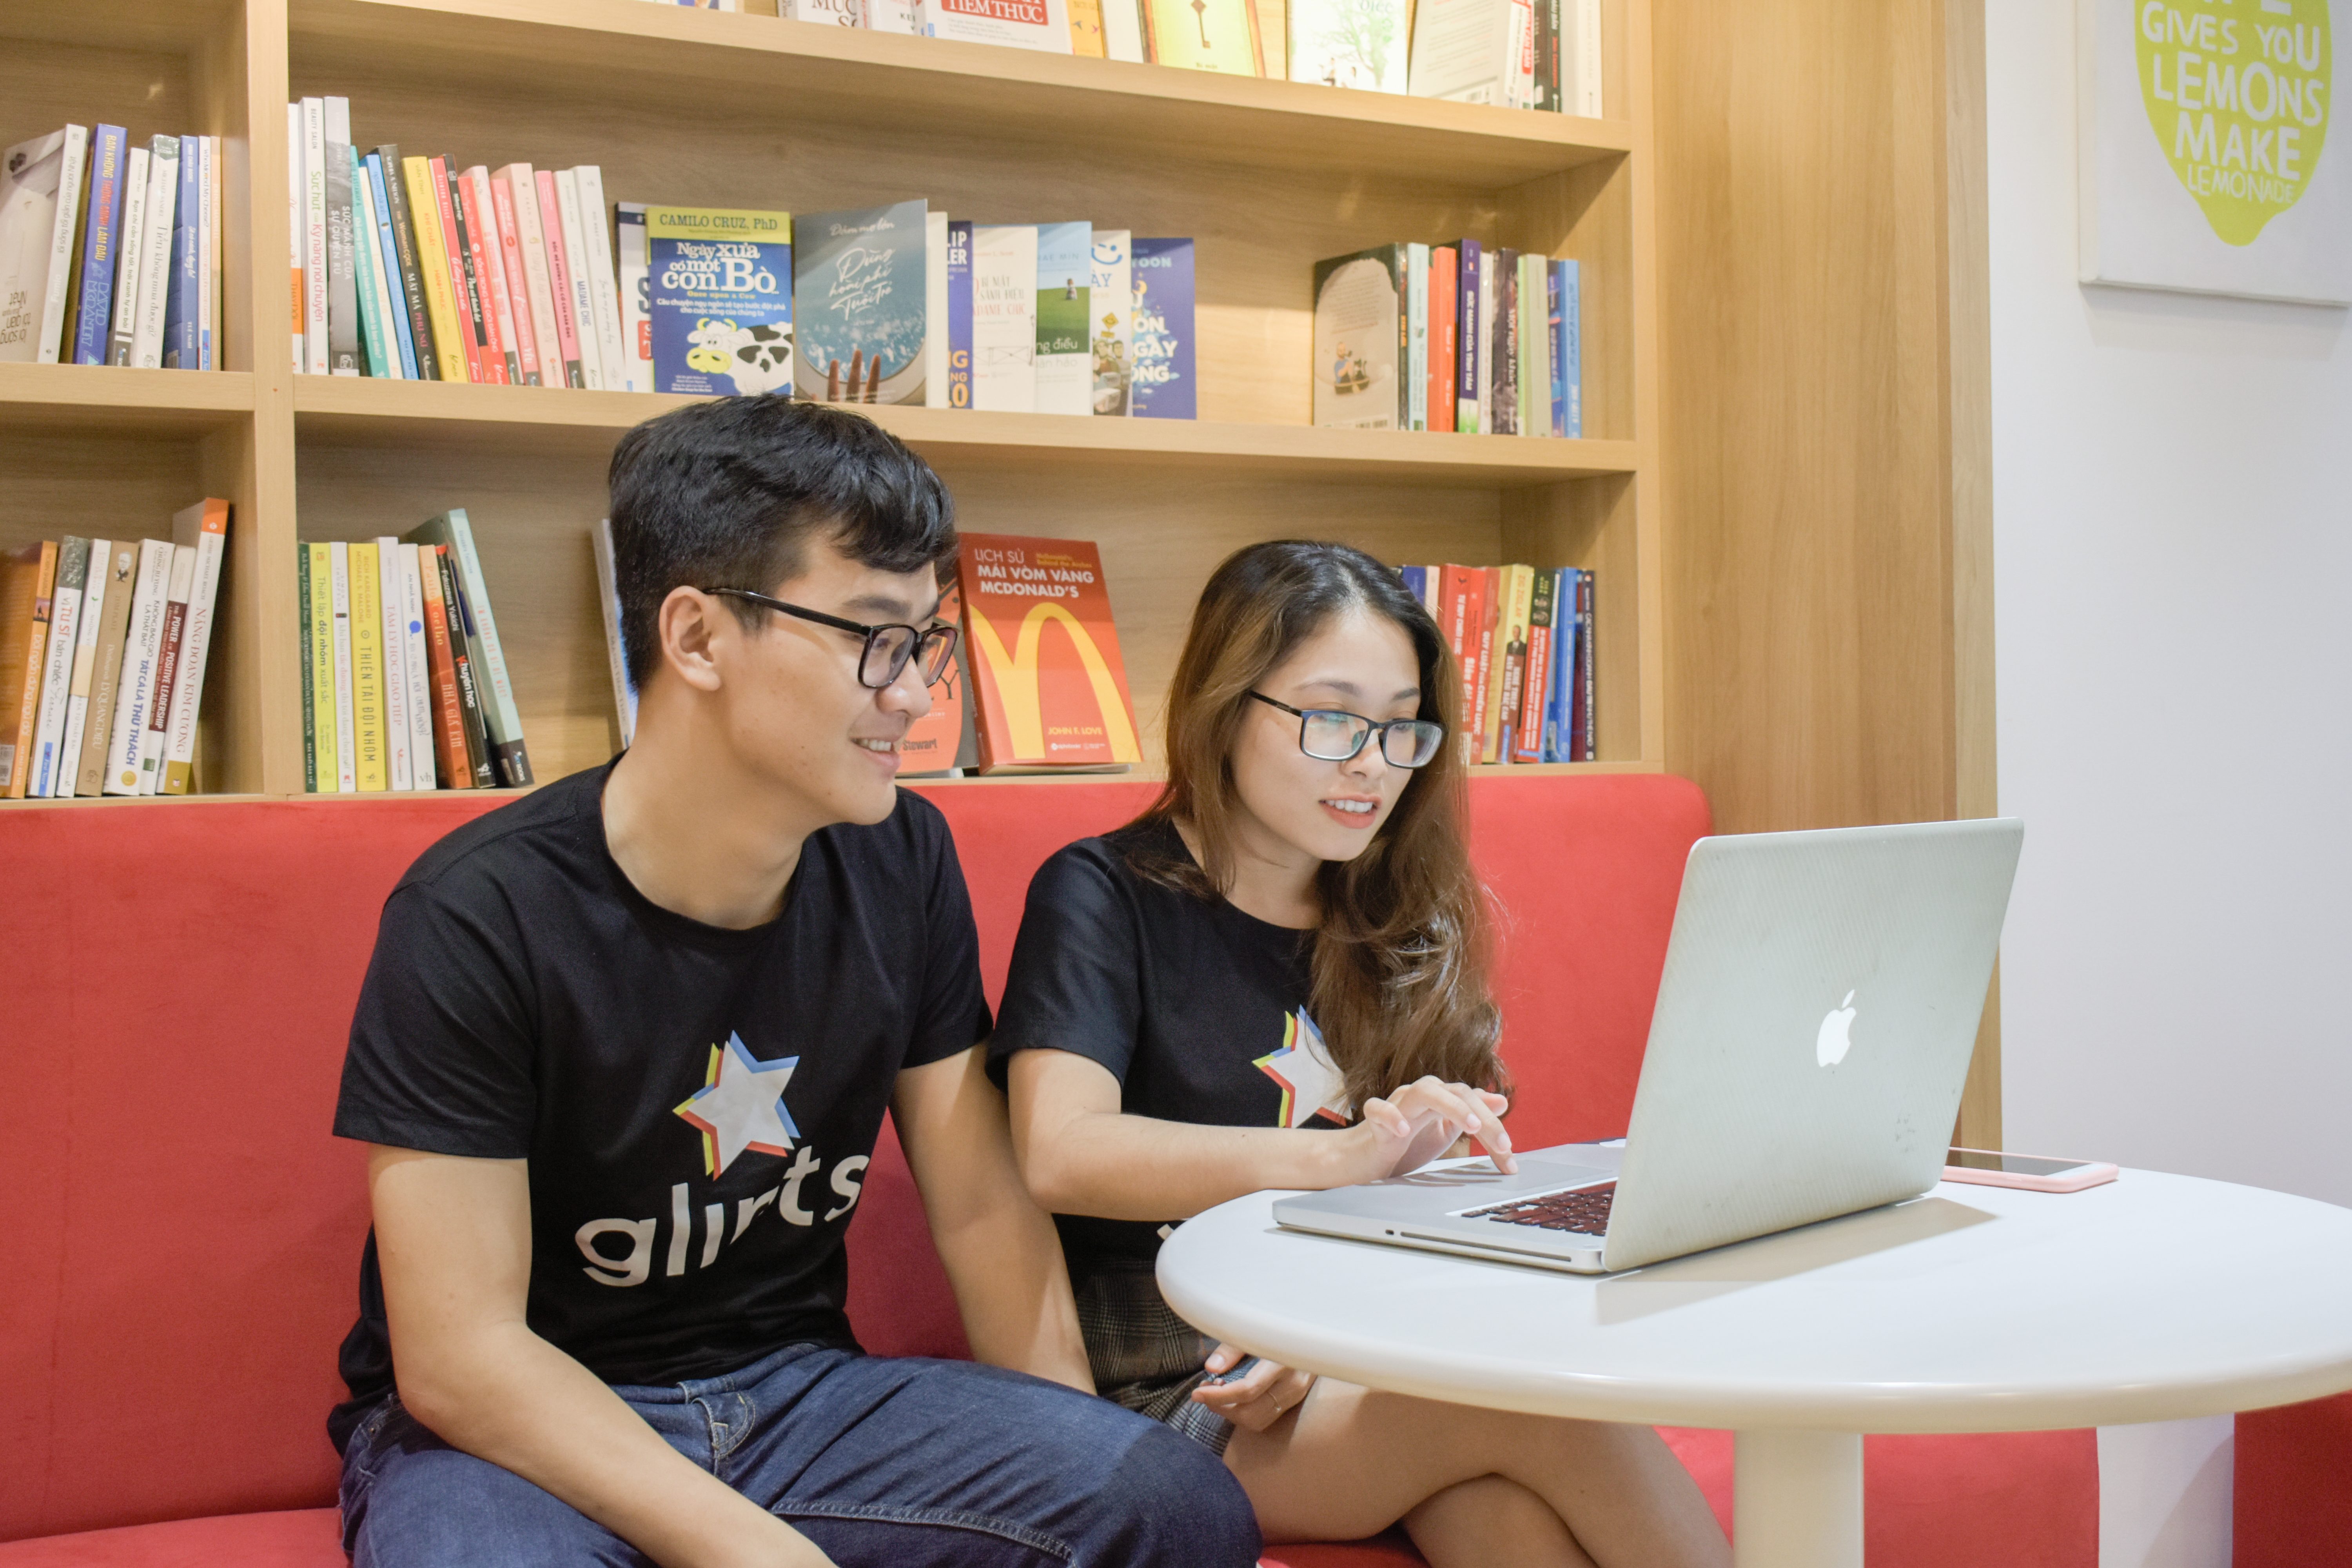 HR tech startup Glints raises $22.5m led by Tokyo-listed PERSOL Holdings